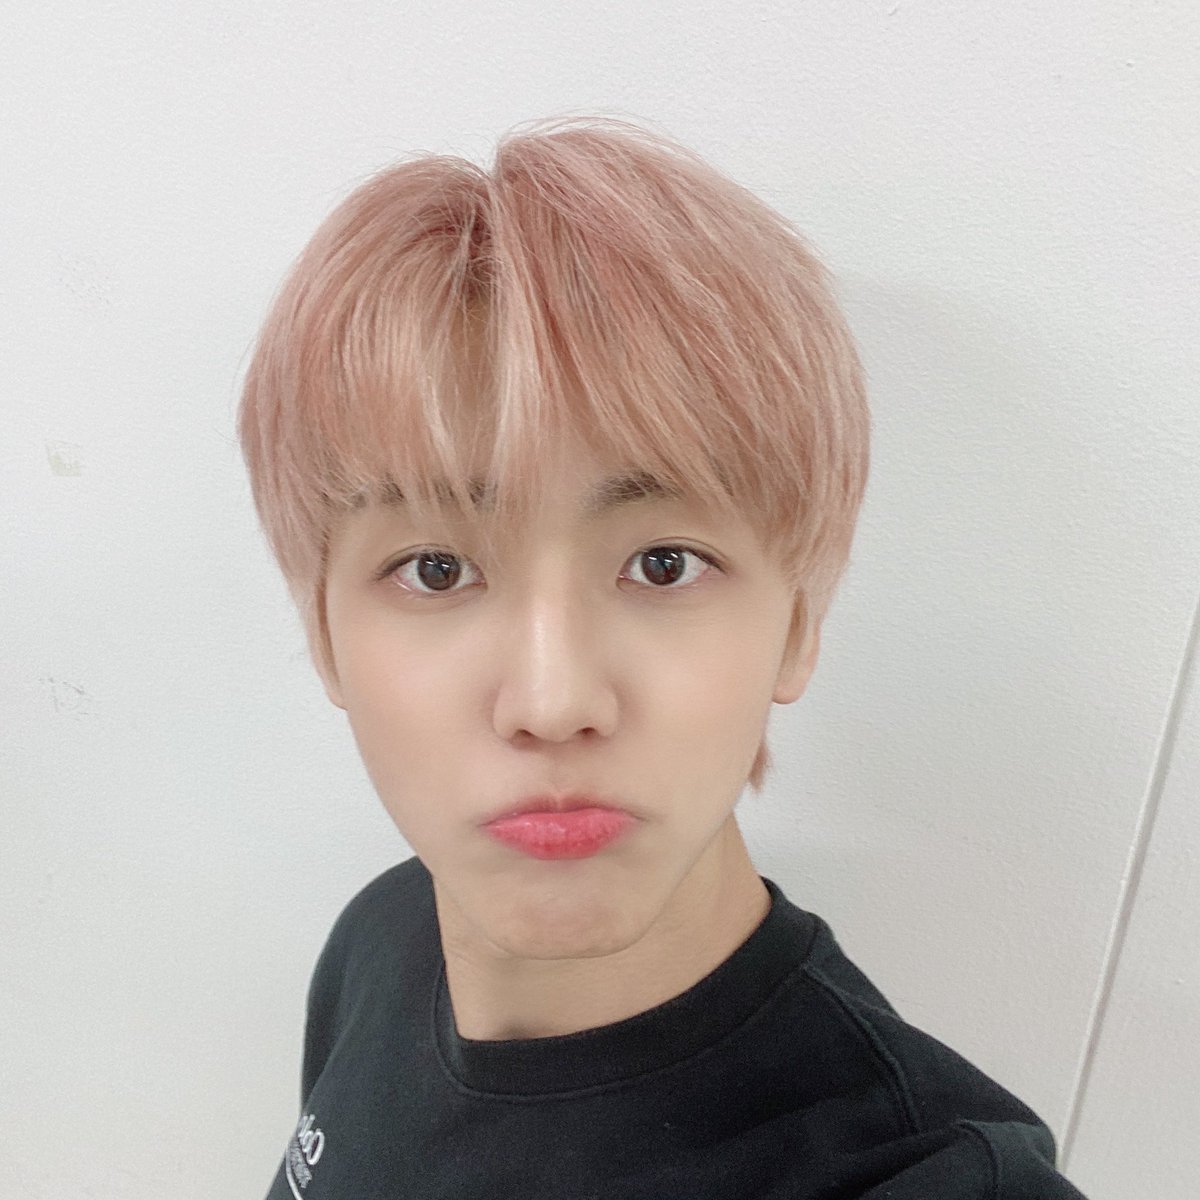 —  day 84 : 3/24/2020JAEMIN SELCA TODAY THANK YOU GOD FOR THIS WONDERFUL FOOD IN YOUR NAME WE PRAY